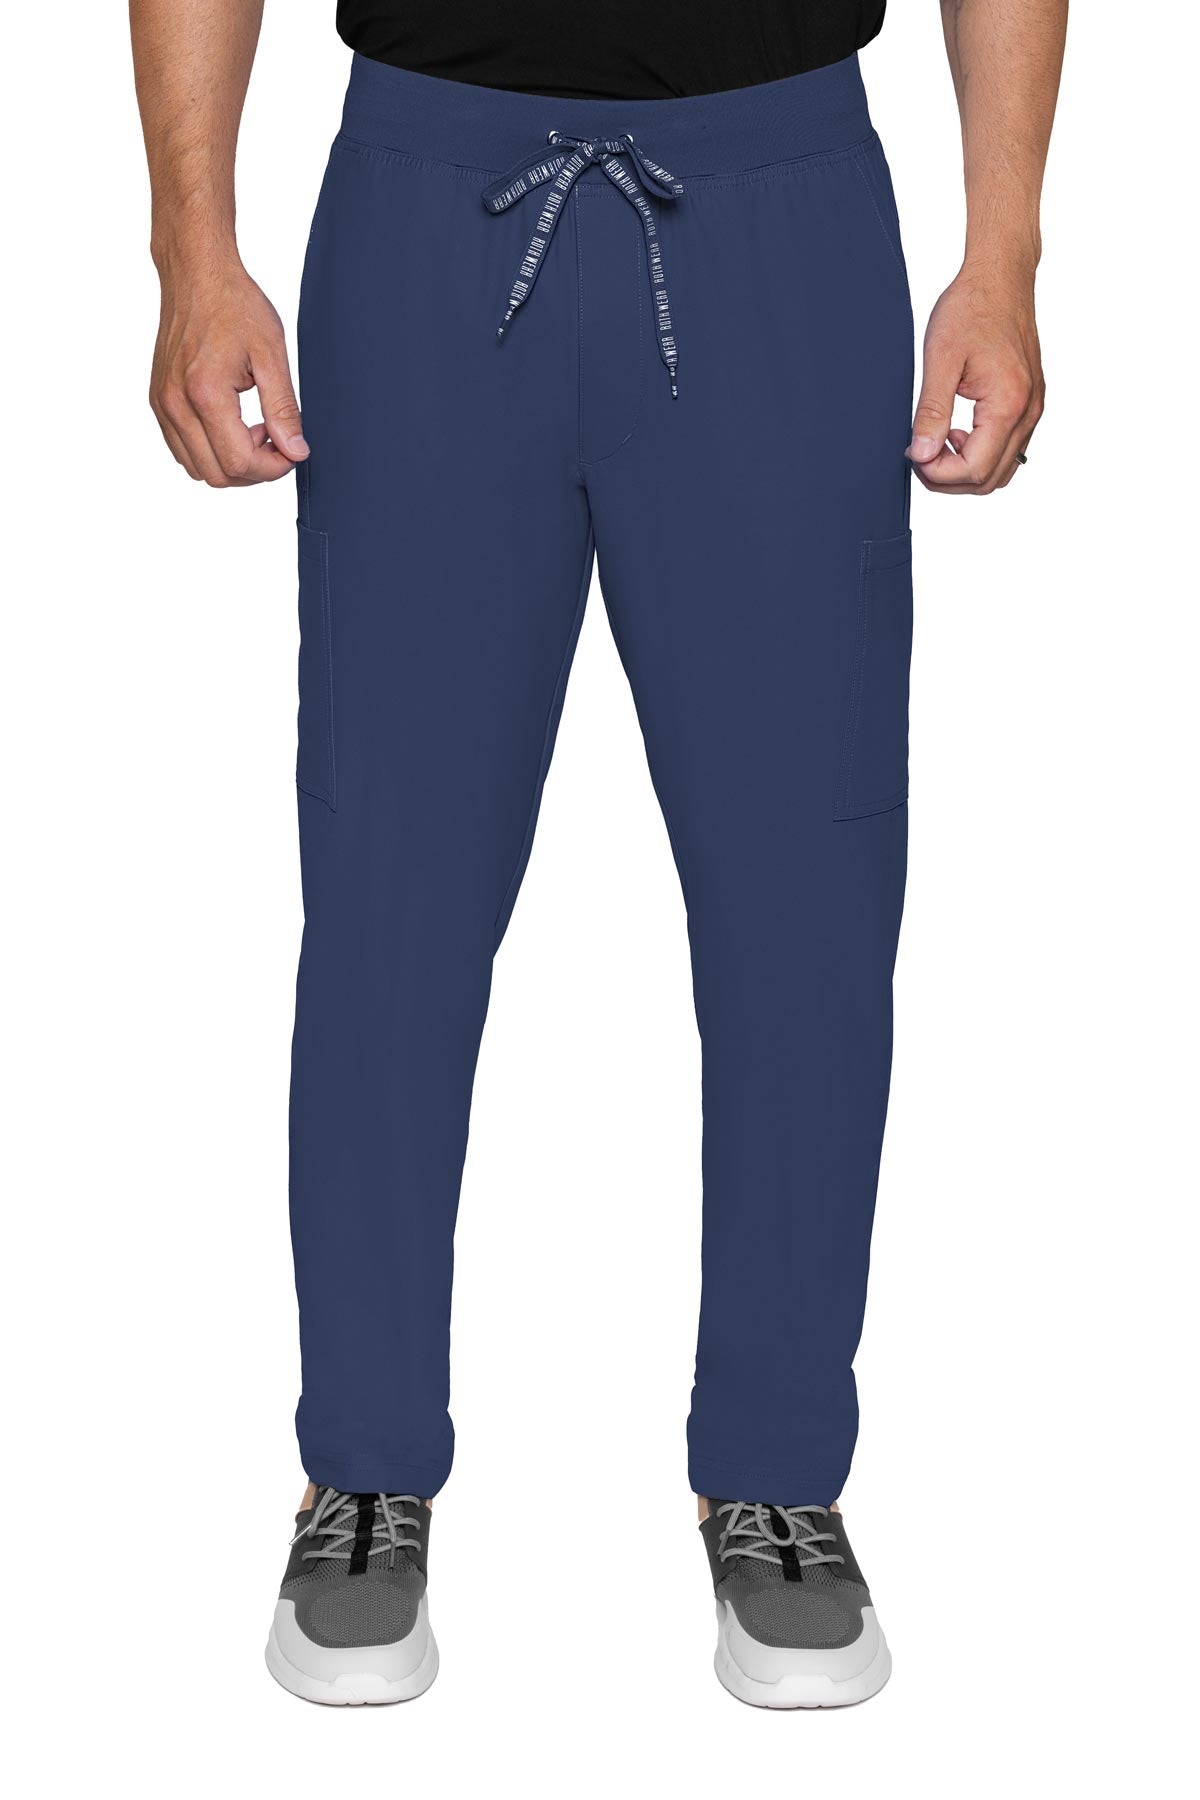 Med Couture Roth Wear Insight 2772 Men's Straight Leg Pant Navy